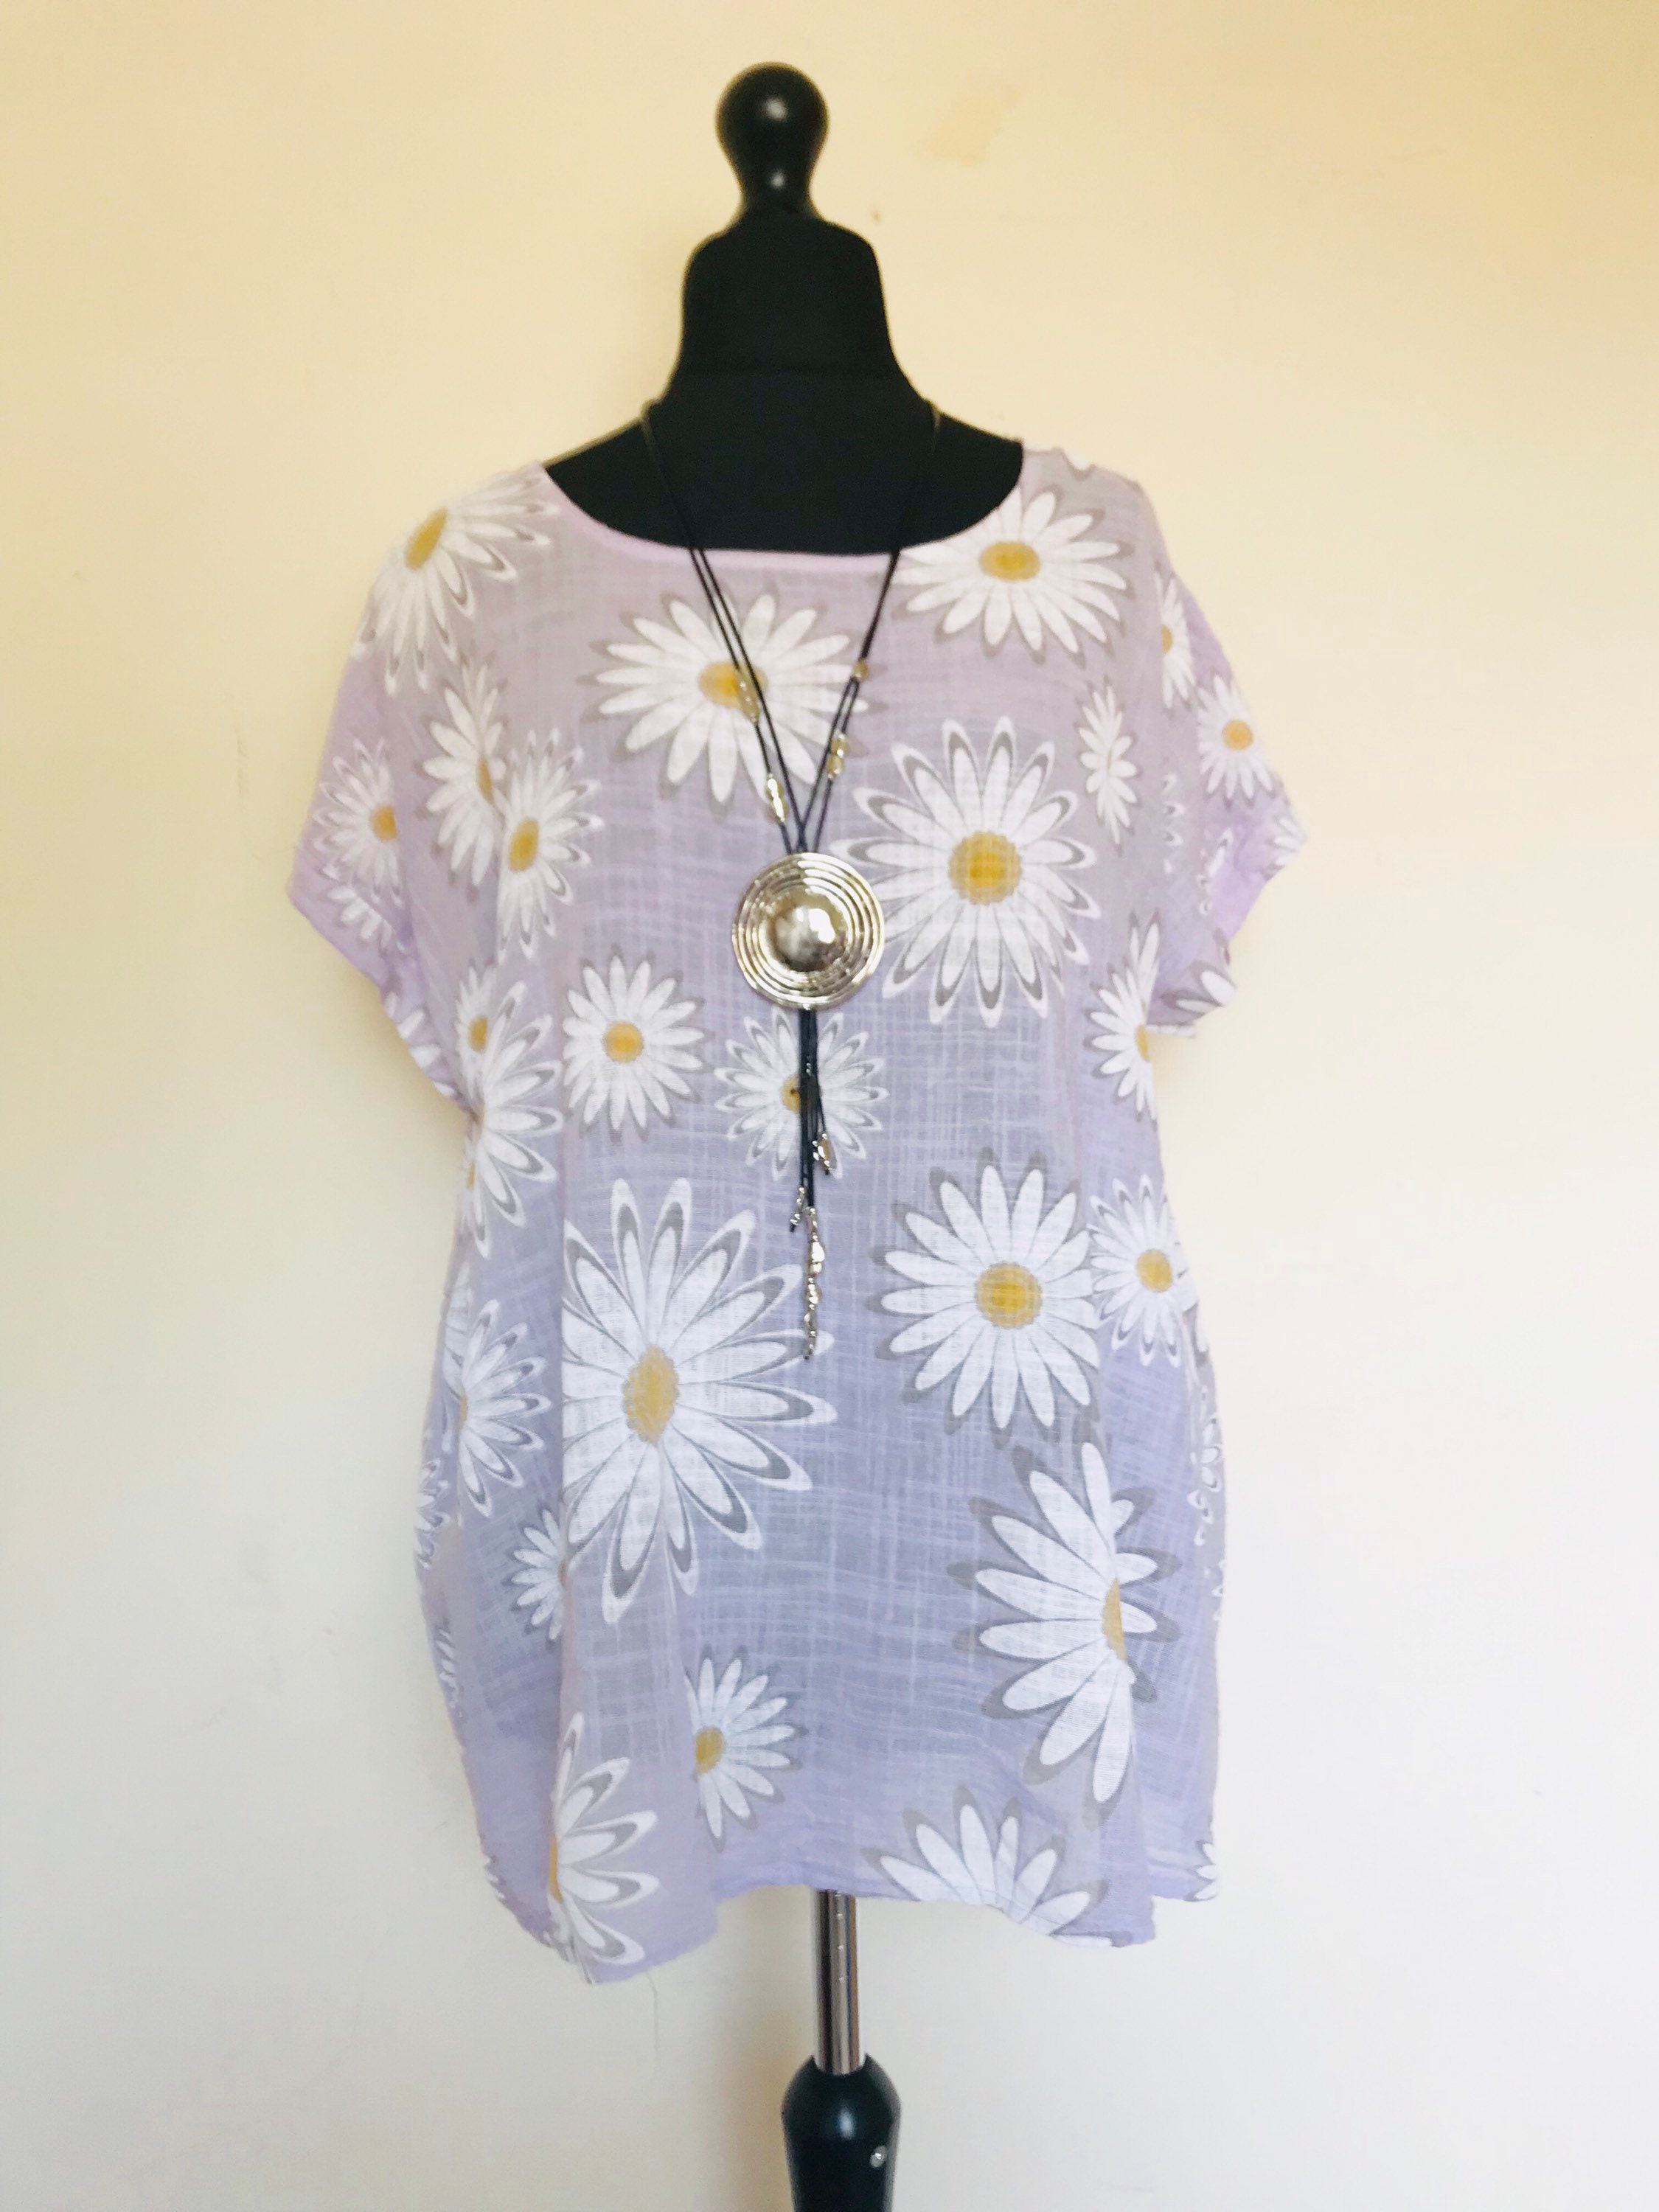 New Made In Italy Lagenlook Lilac Cotton Daisy Print Top UK | Etsy